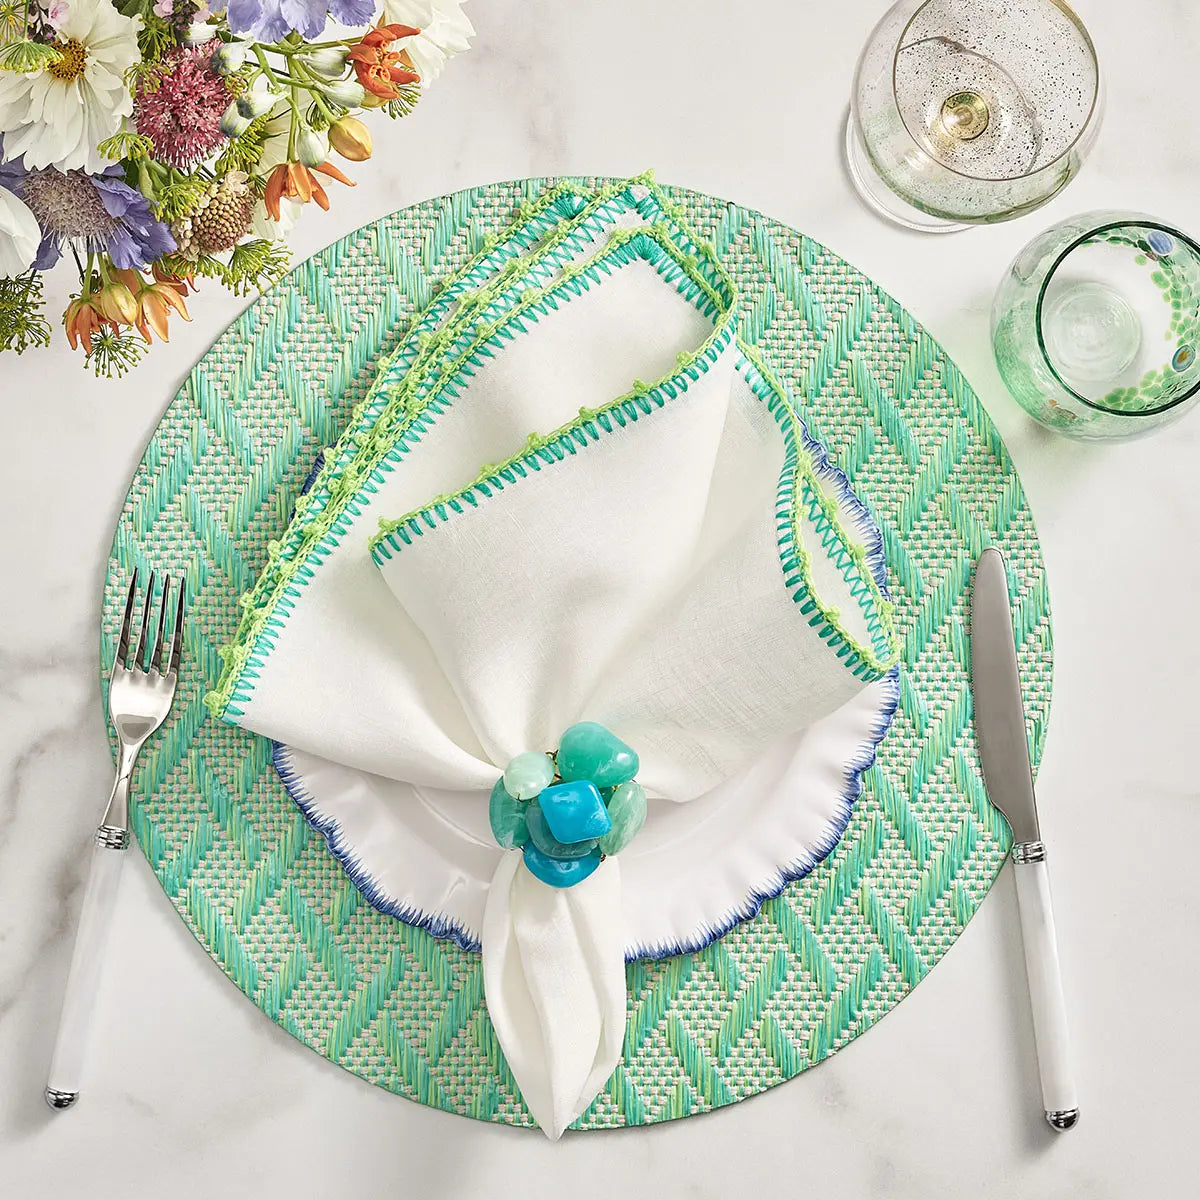 Kim Seybert Knotted Edge Napkin in White Marine and Lime set on a table